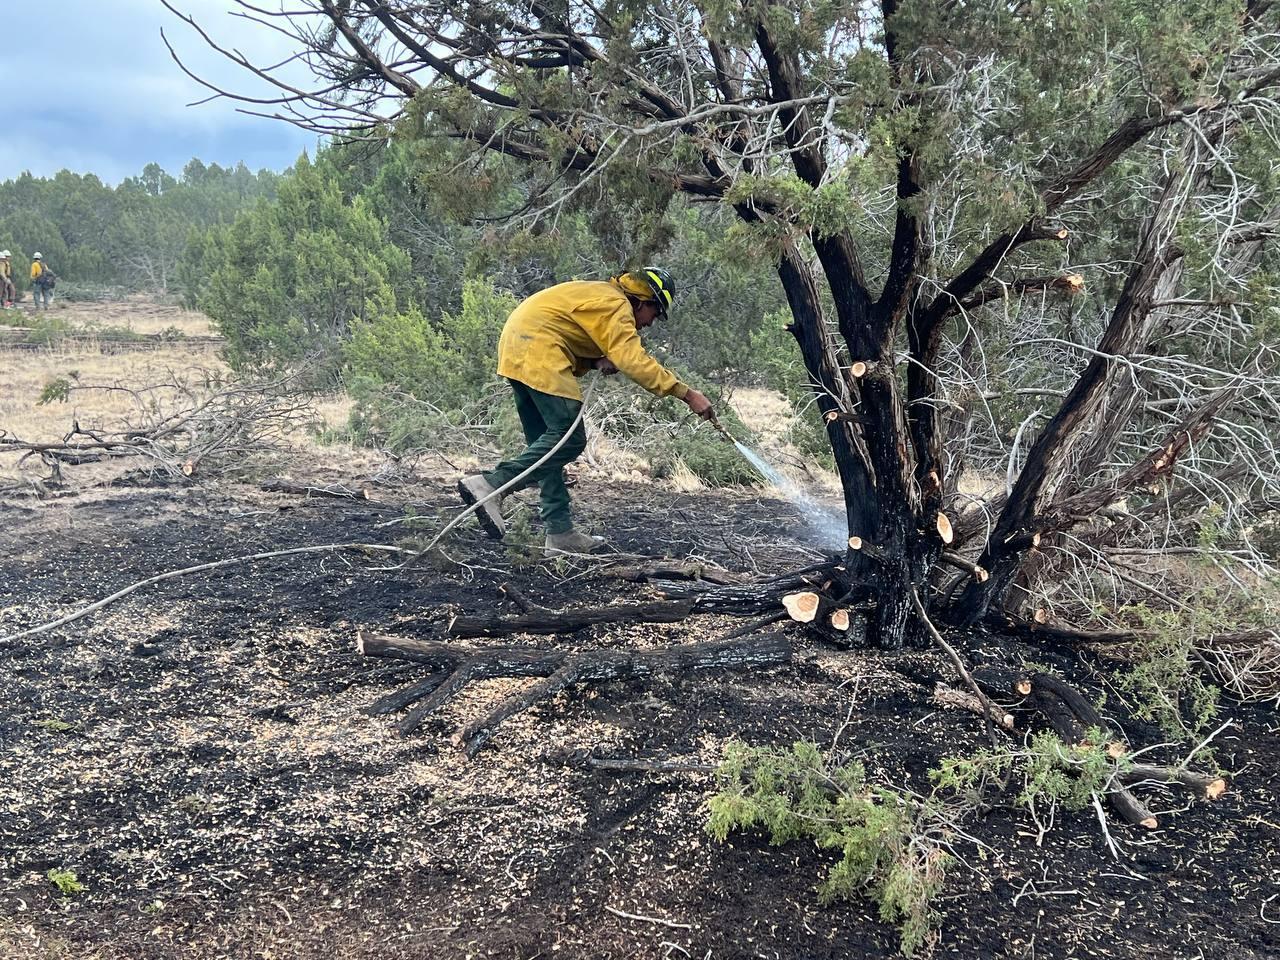 Male firefighter in yellow shirt, green pants, and a hardhat uses a white hose to spray water around the base of a burned tree.  Vegetation in the background and other firefighters working in background.